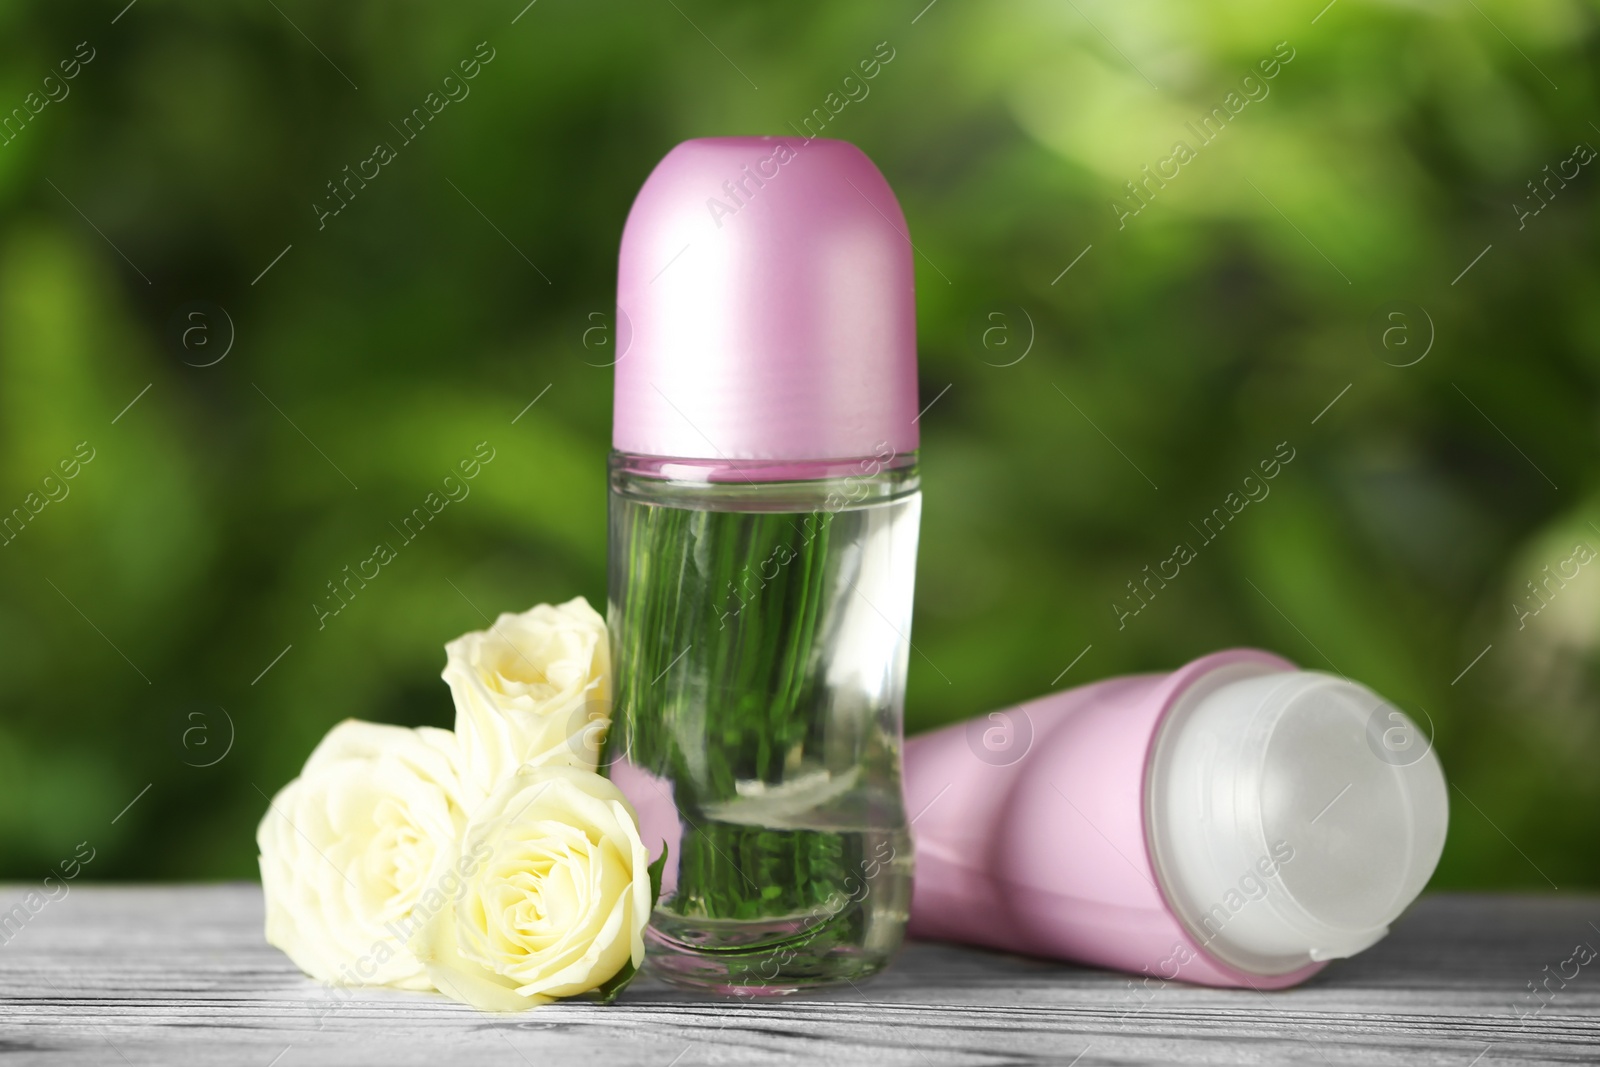 Photo of Natural deodorants with white roses on wooden table against blurred green background